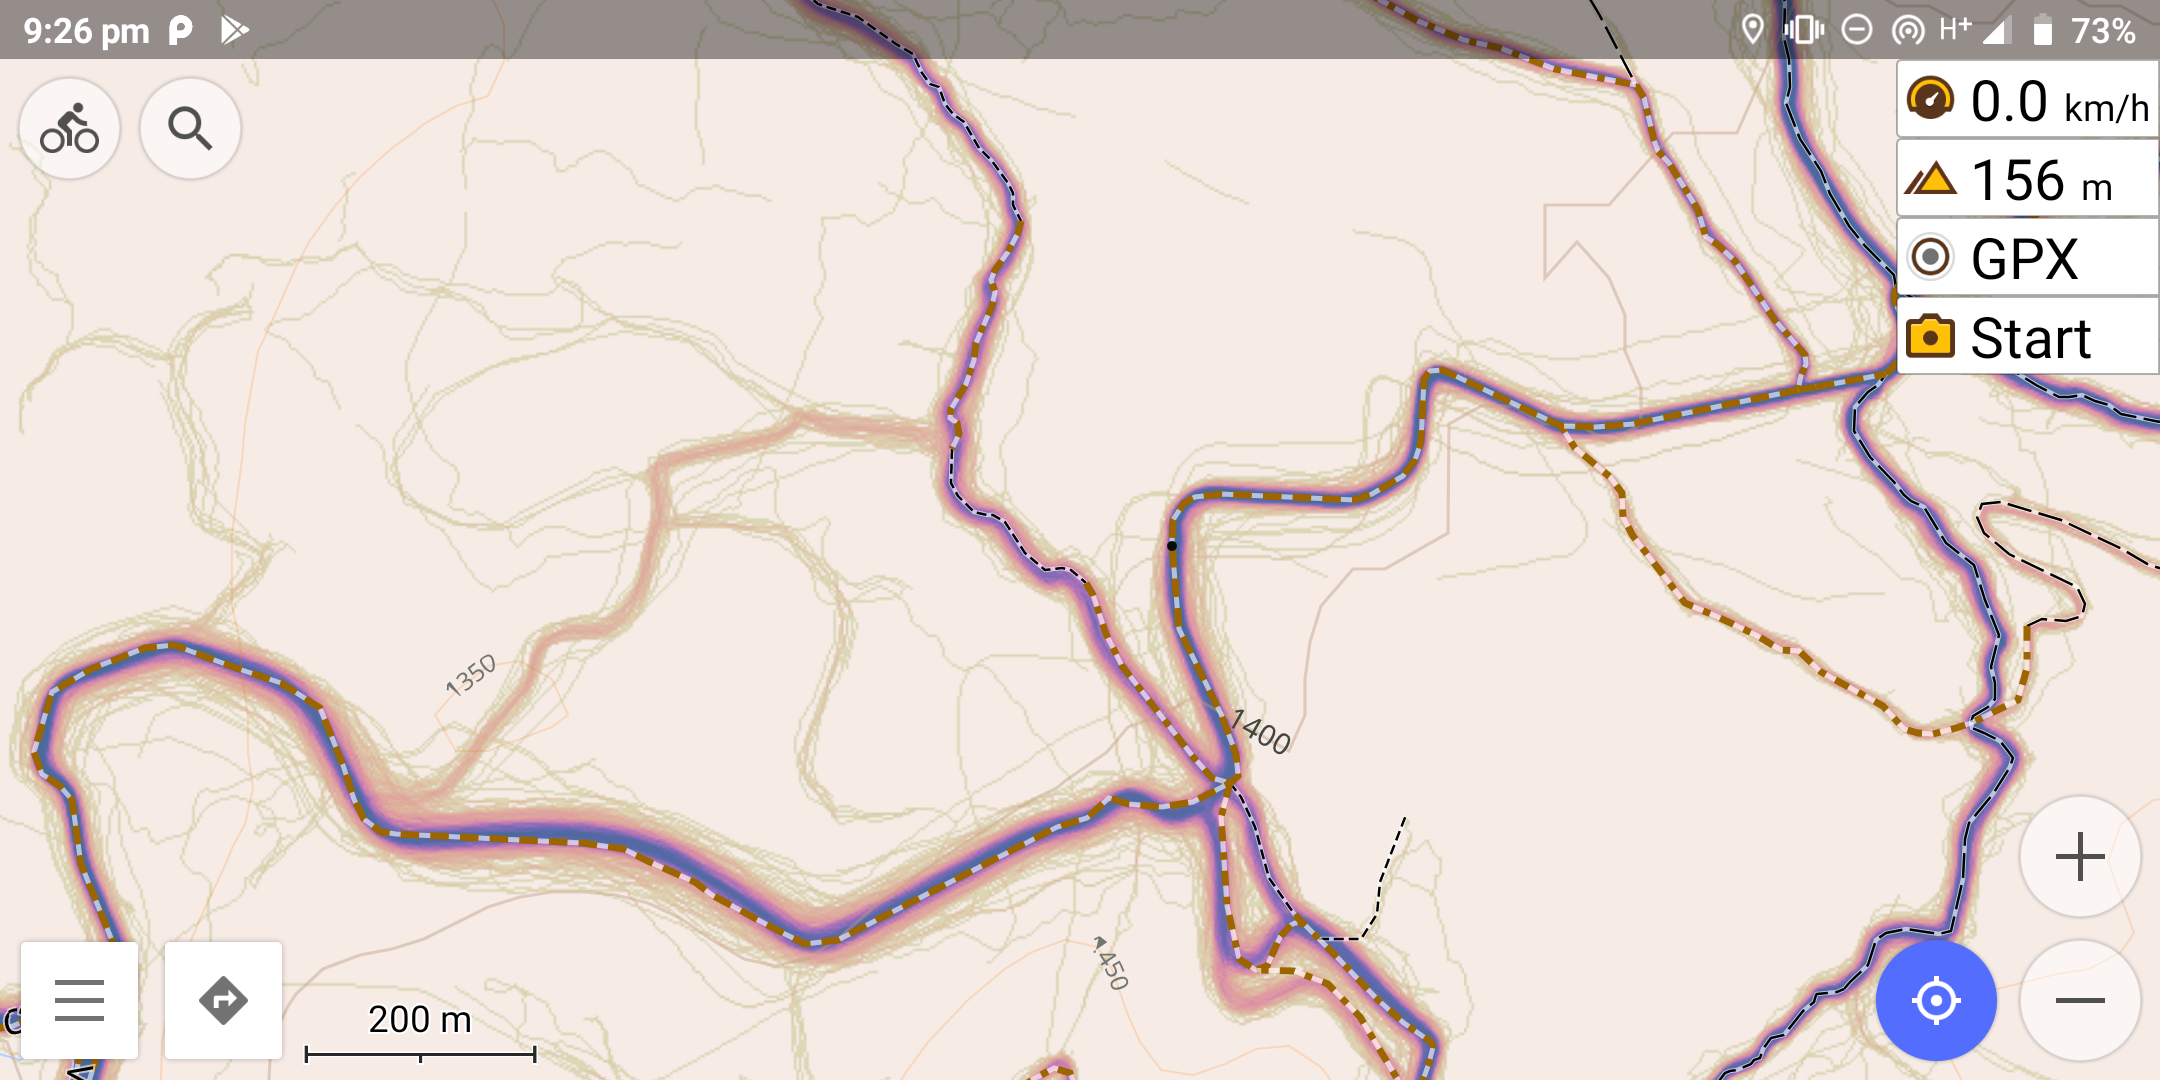 Strava heatmap as an underaly in Osmand